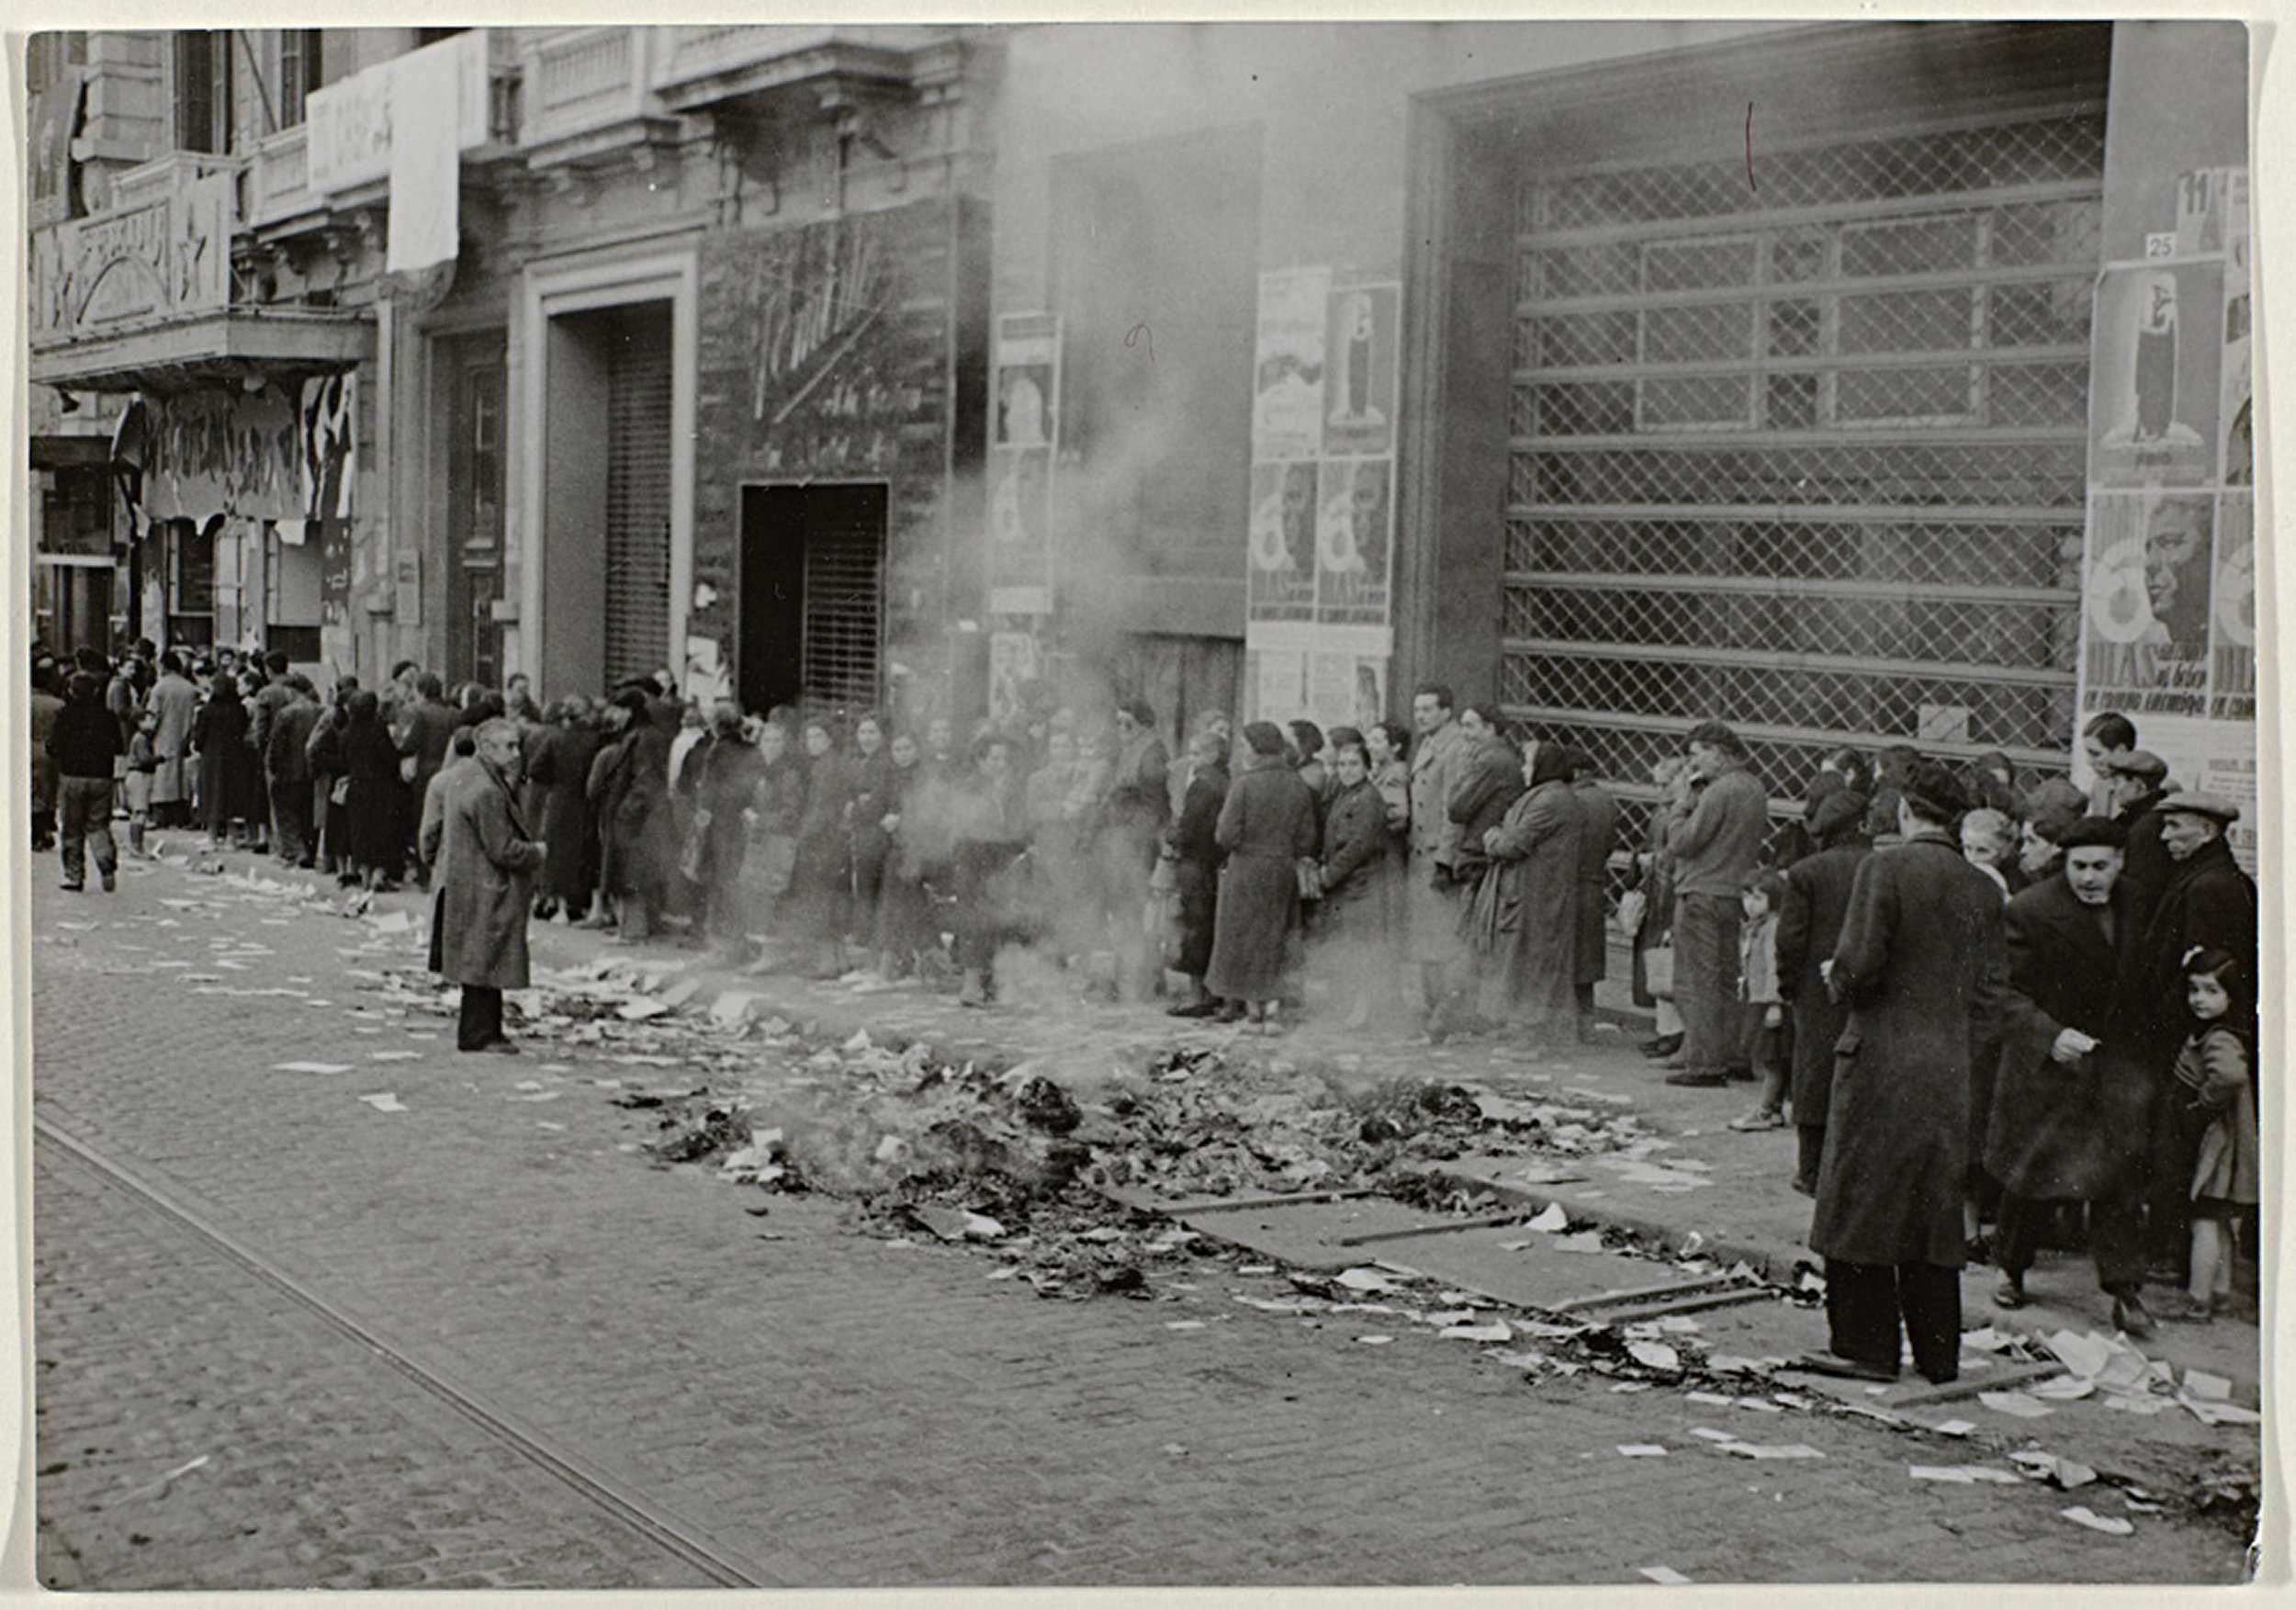 A photograph of the destructions caused by the Spanish Civil War